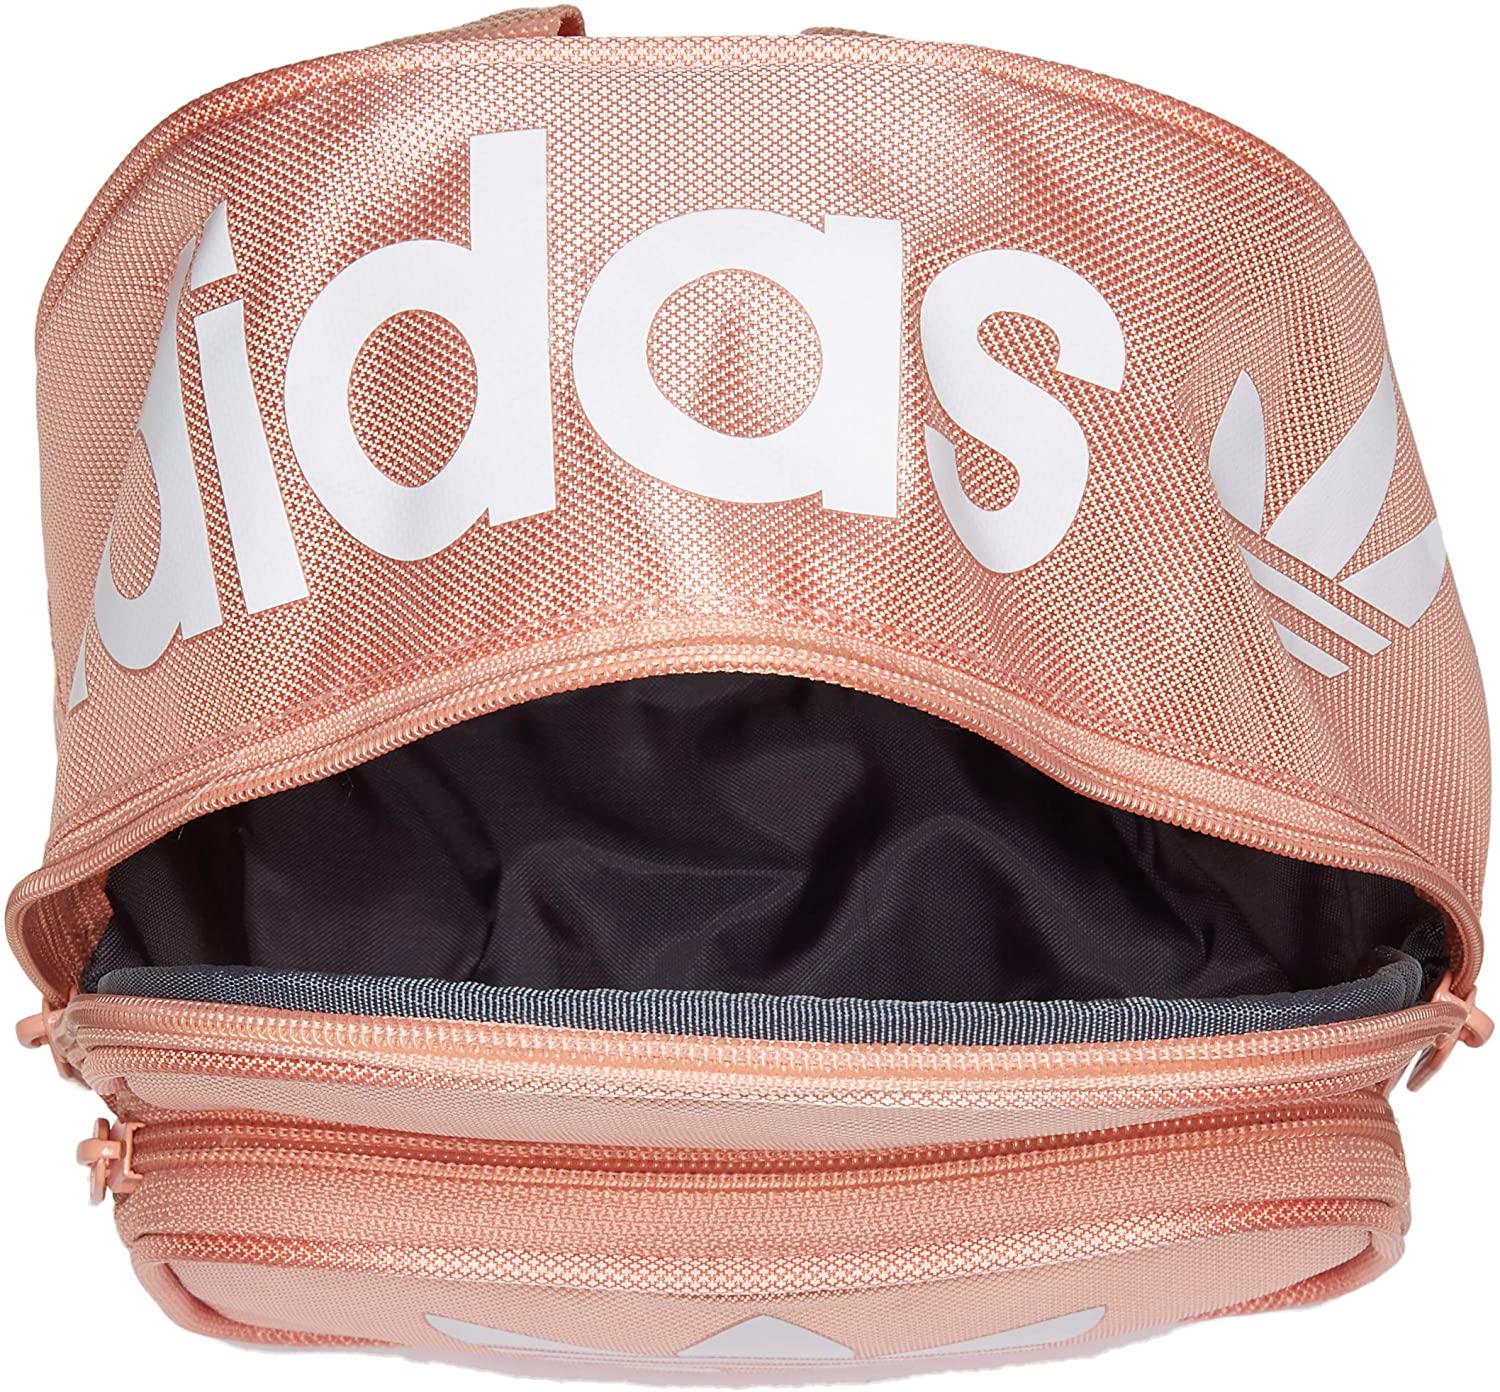 adidas Originals Women's Santiago Mini Backpack, Dust Pink, One Size One Size Dust Pink - image 5 of 7